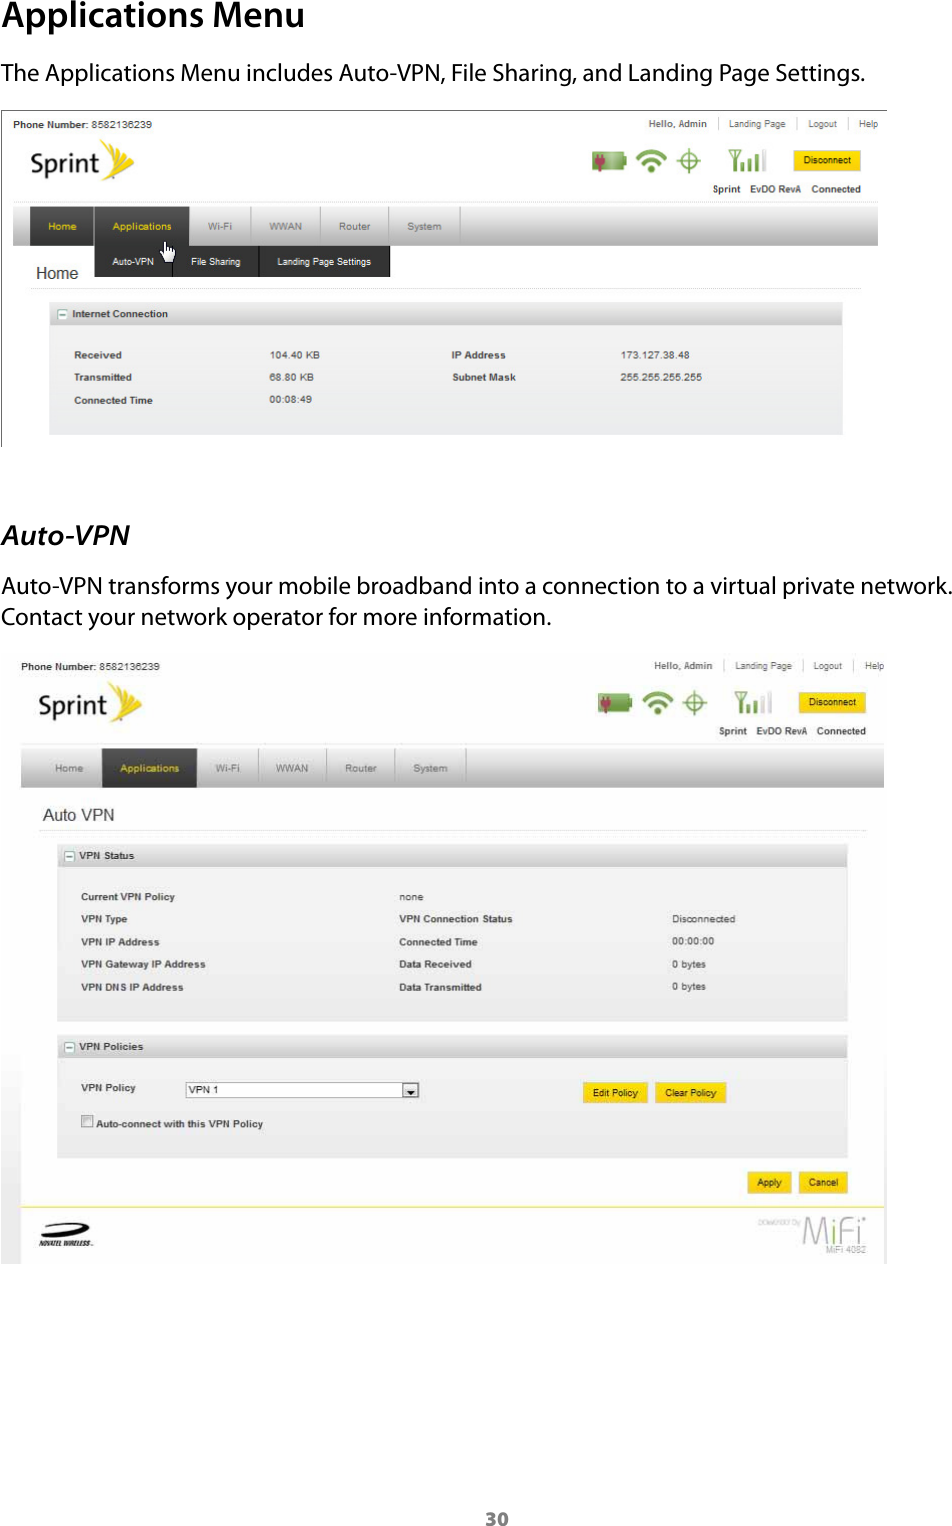 30Applications MenuThe Applications Menu includes Auto-VPN, File Sharing, and Landing Page Settings.Auto-VPNAuto-VPN transforms your mobile broadband into a connection to a virtual private network. Contact your network operator for more information.